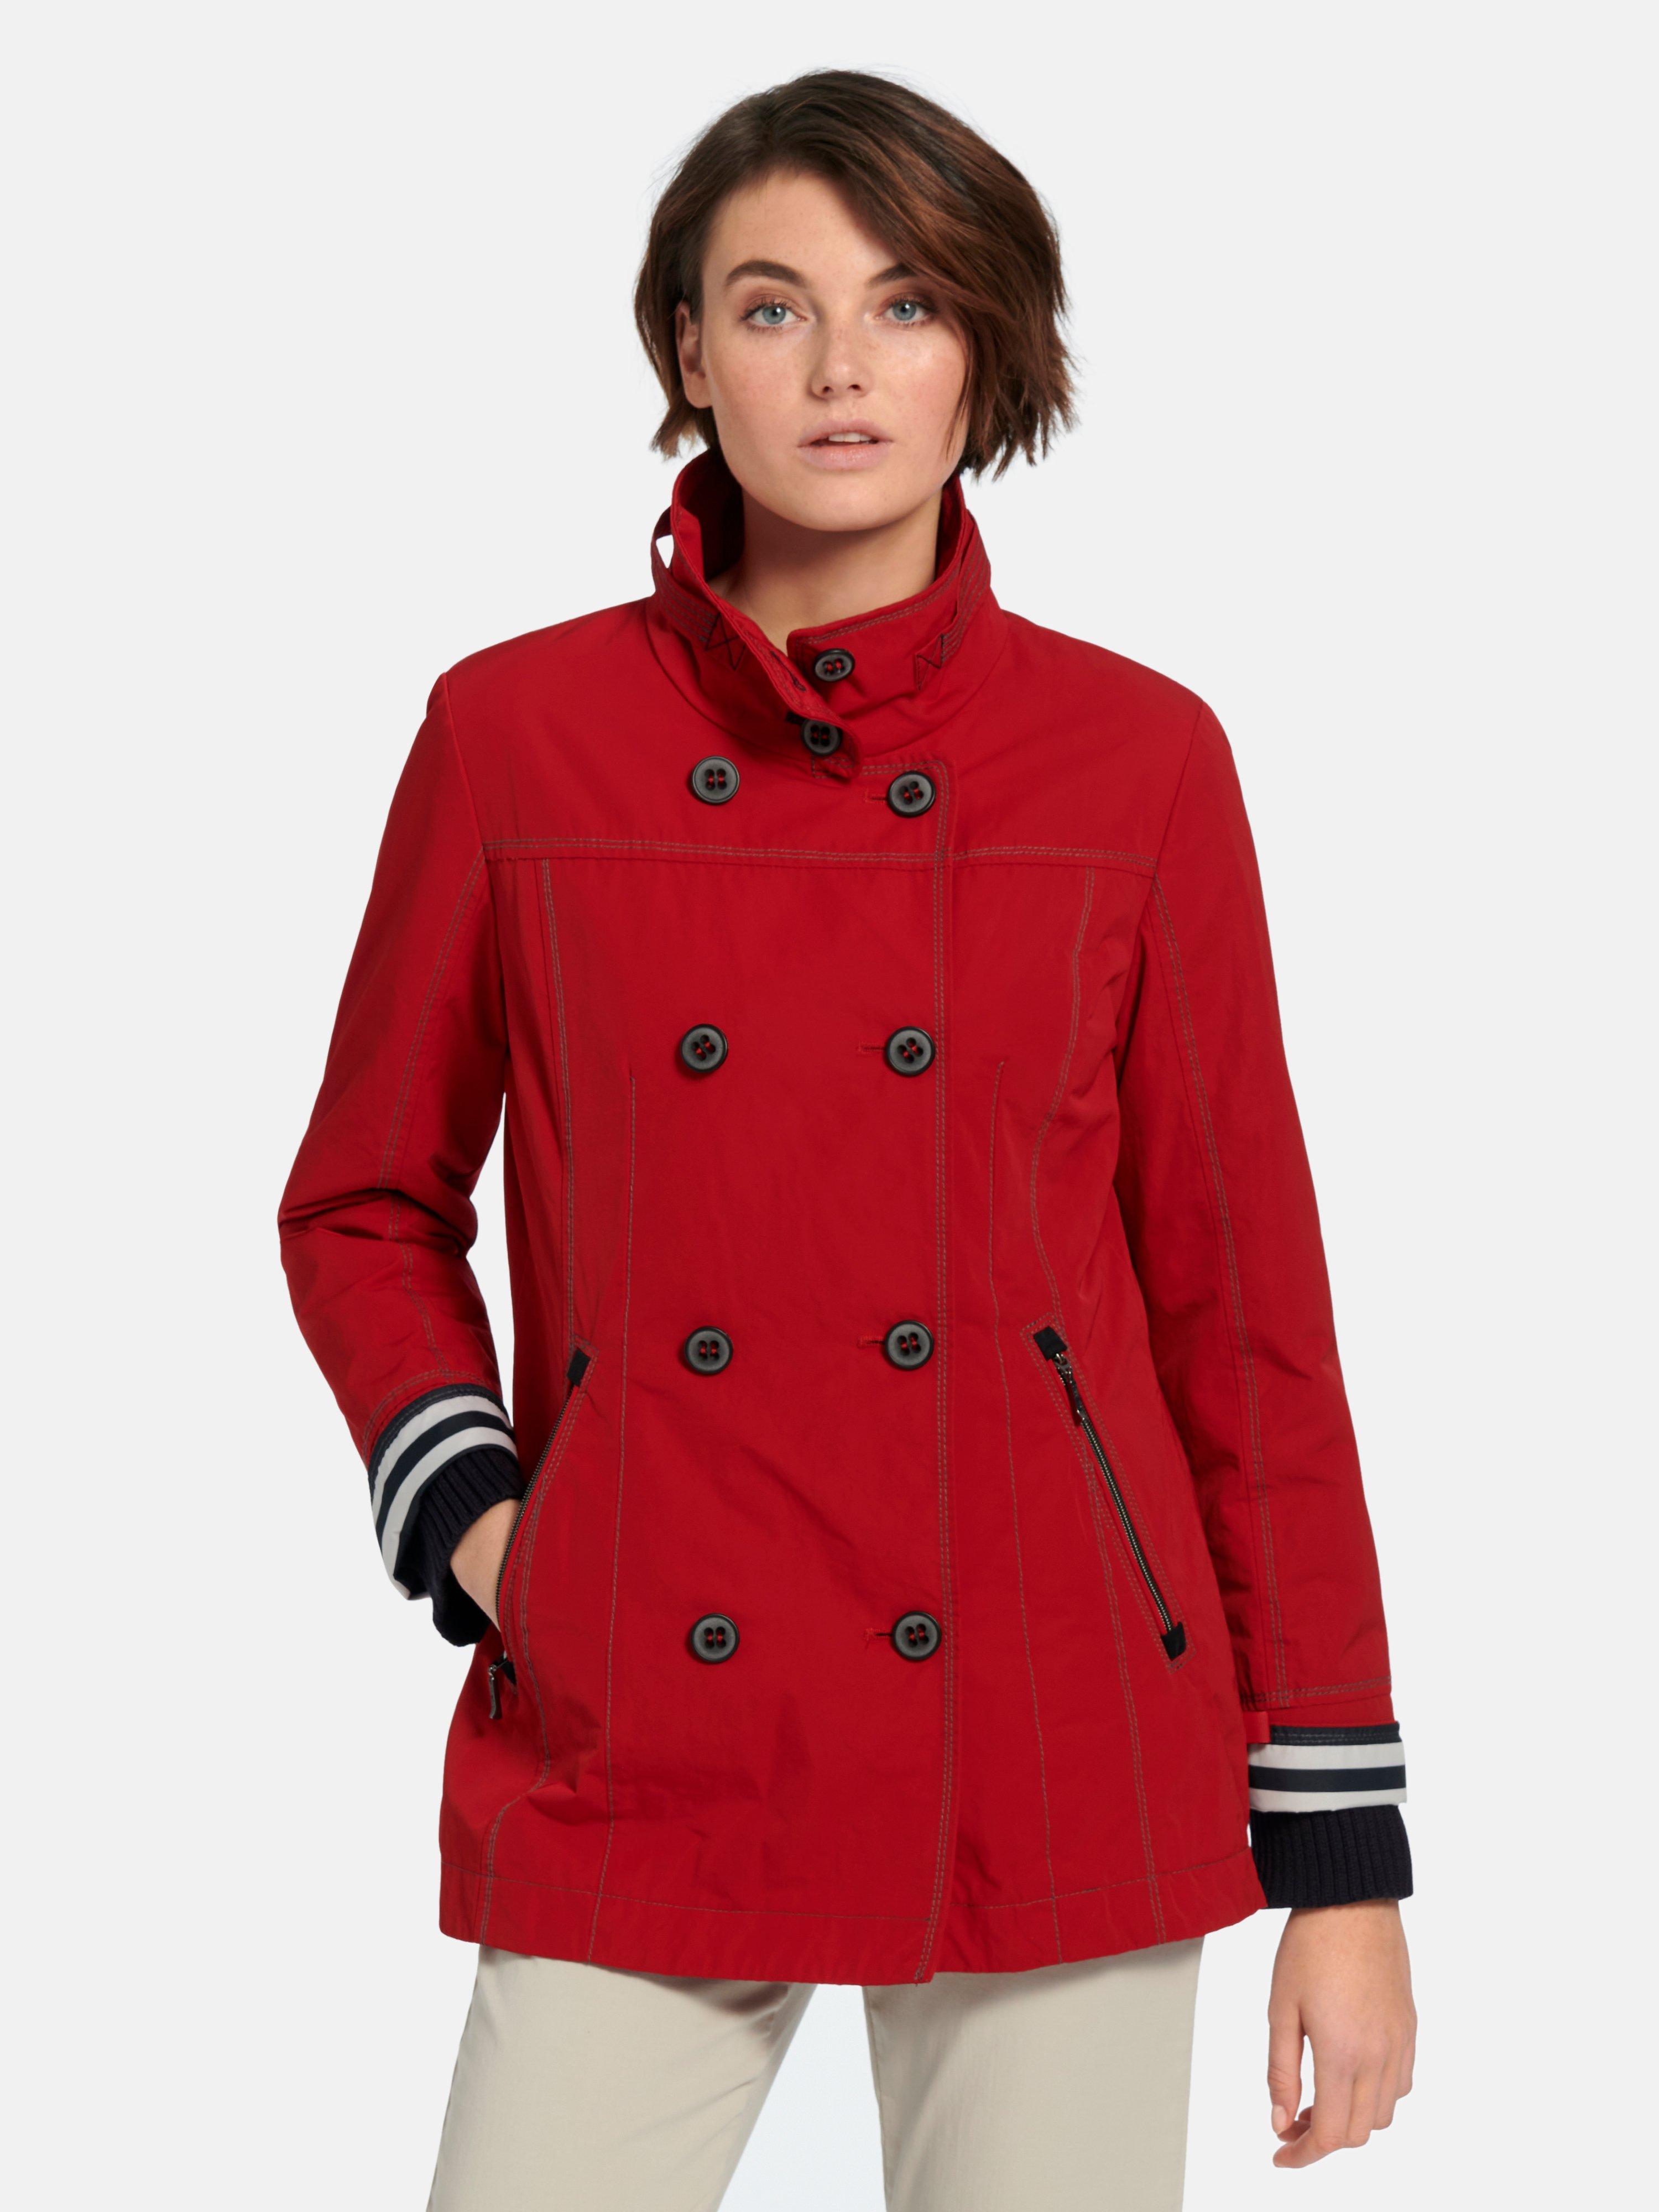 Bret coat style - - red caban Double-breasted Gil